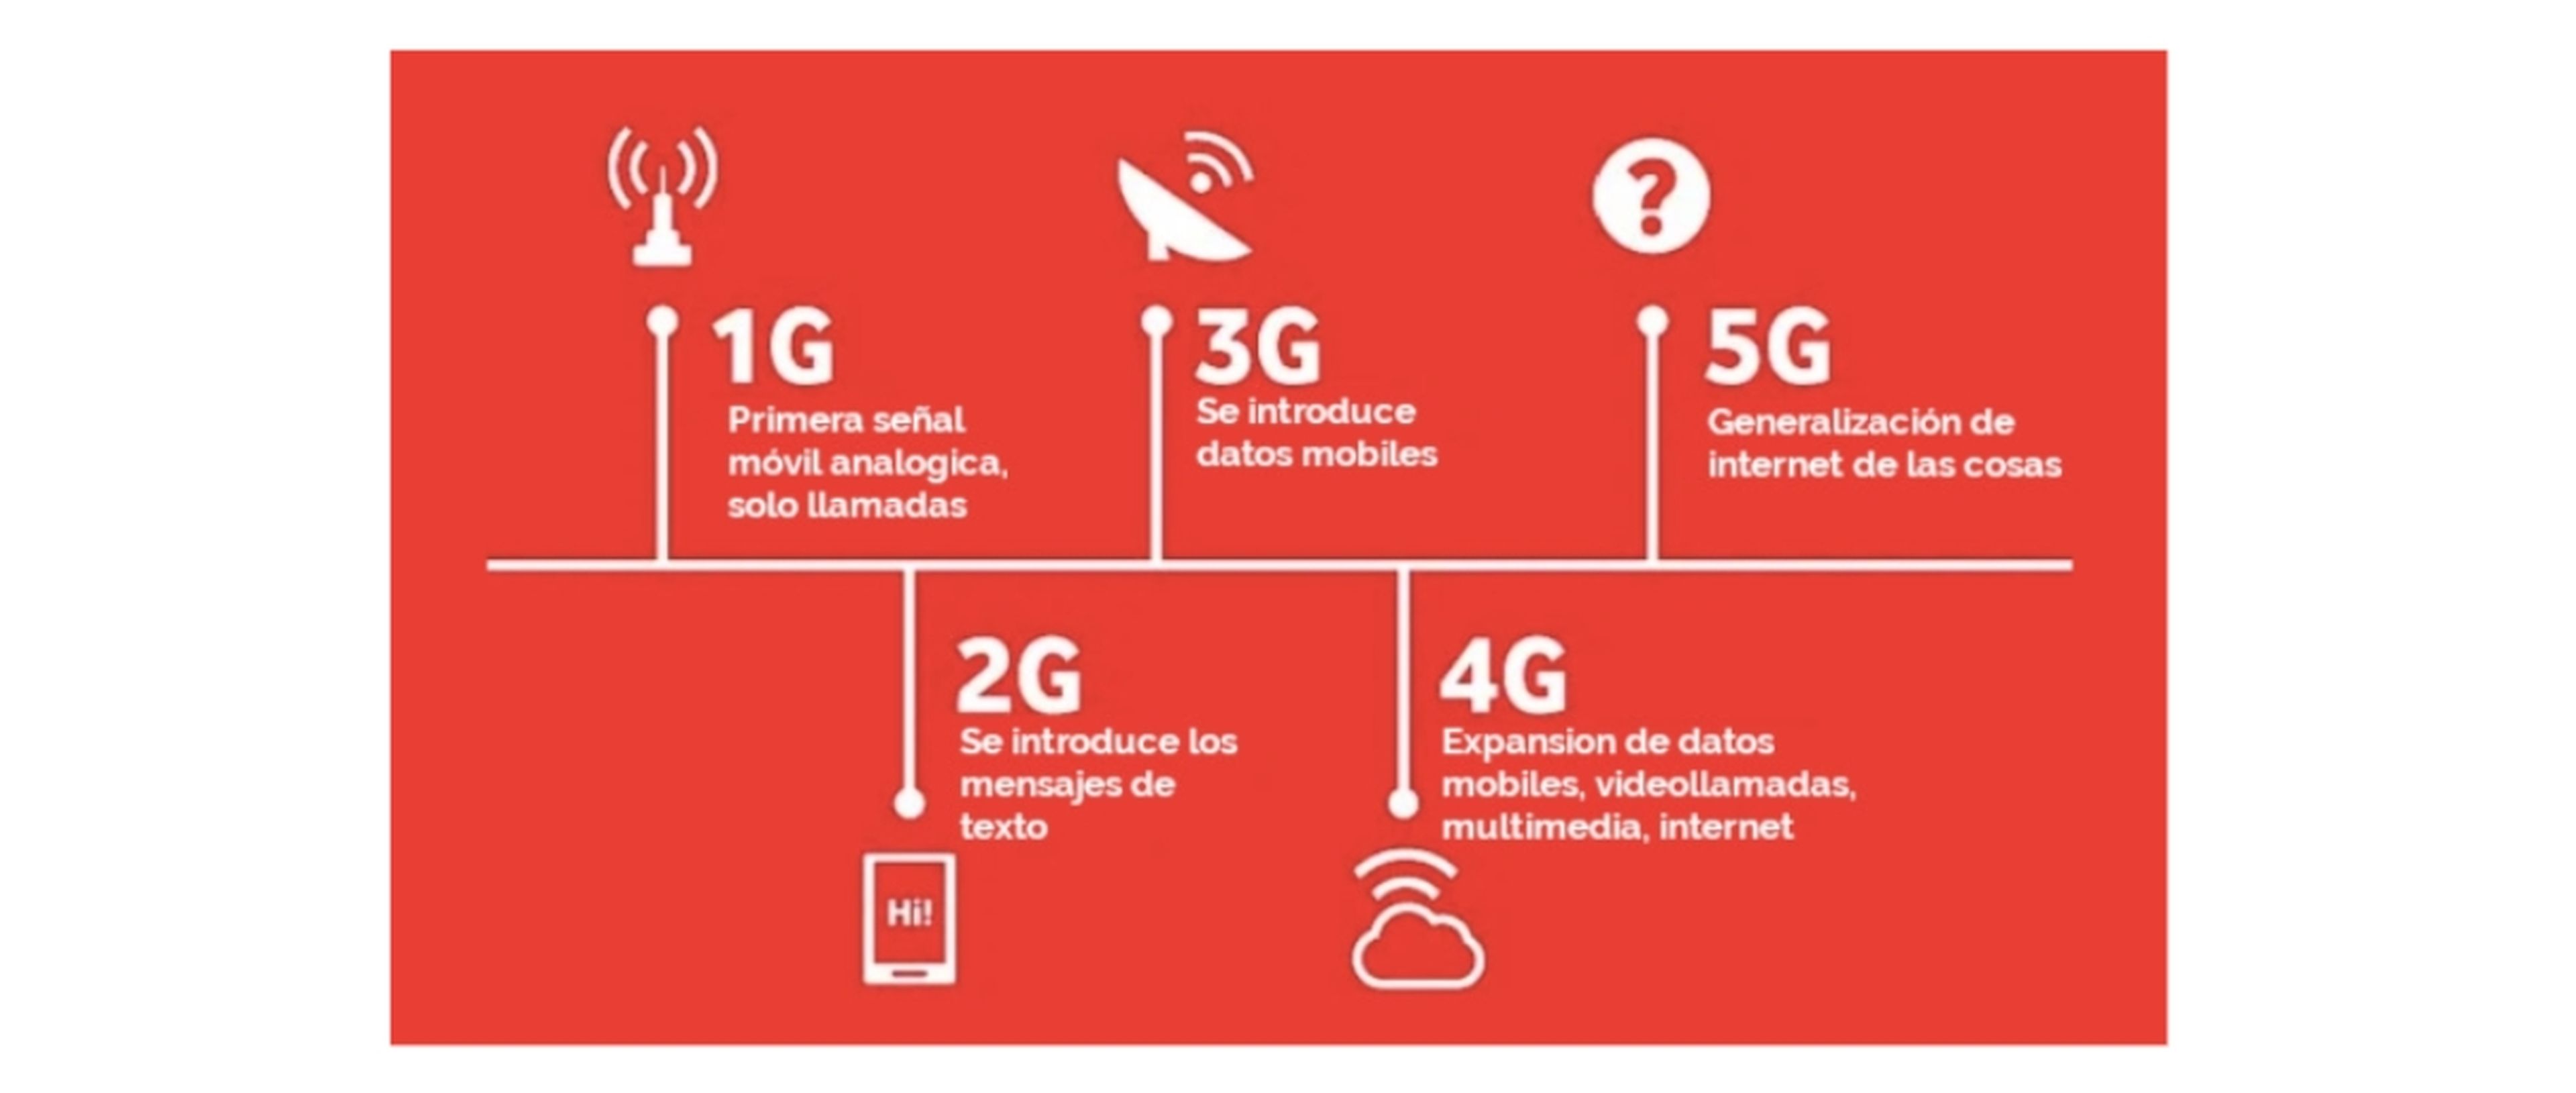 Differences between 1G, 2G, 3G, 4G and 5G.  Source: 4GATHOME